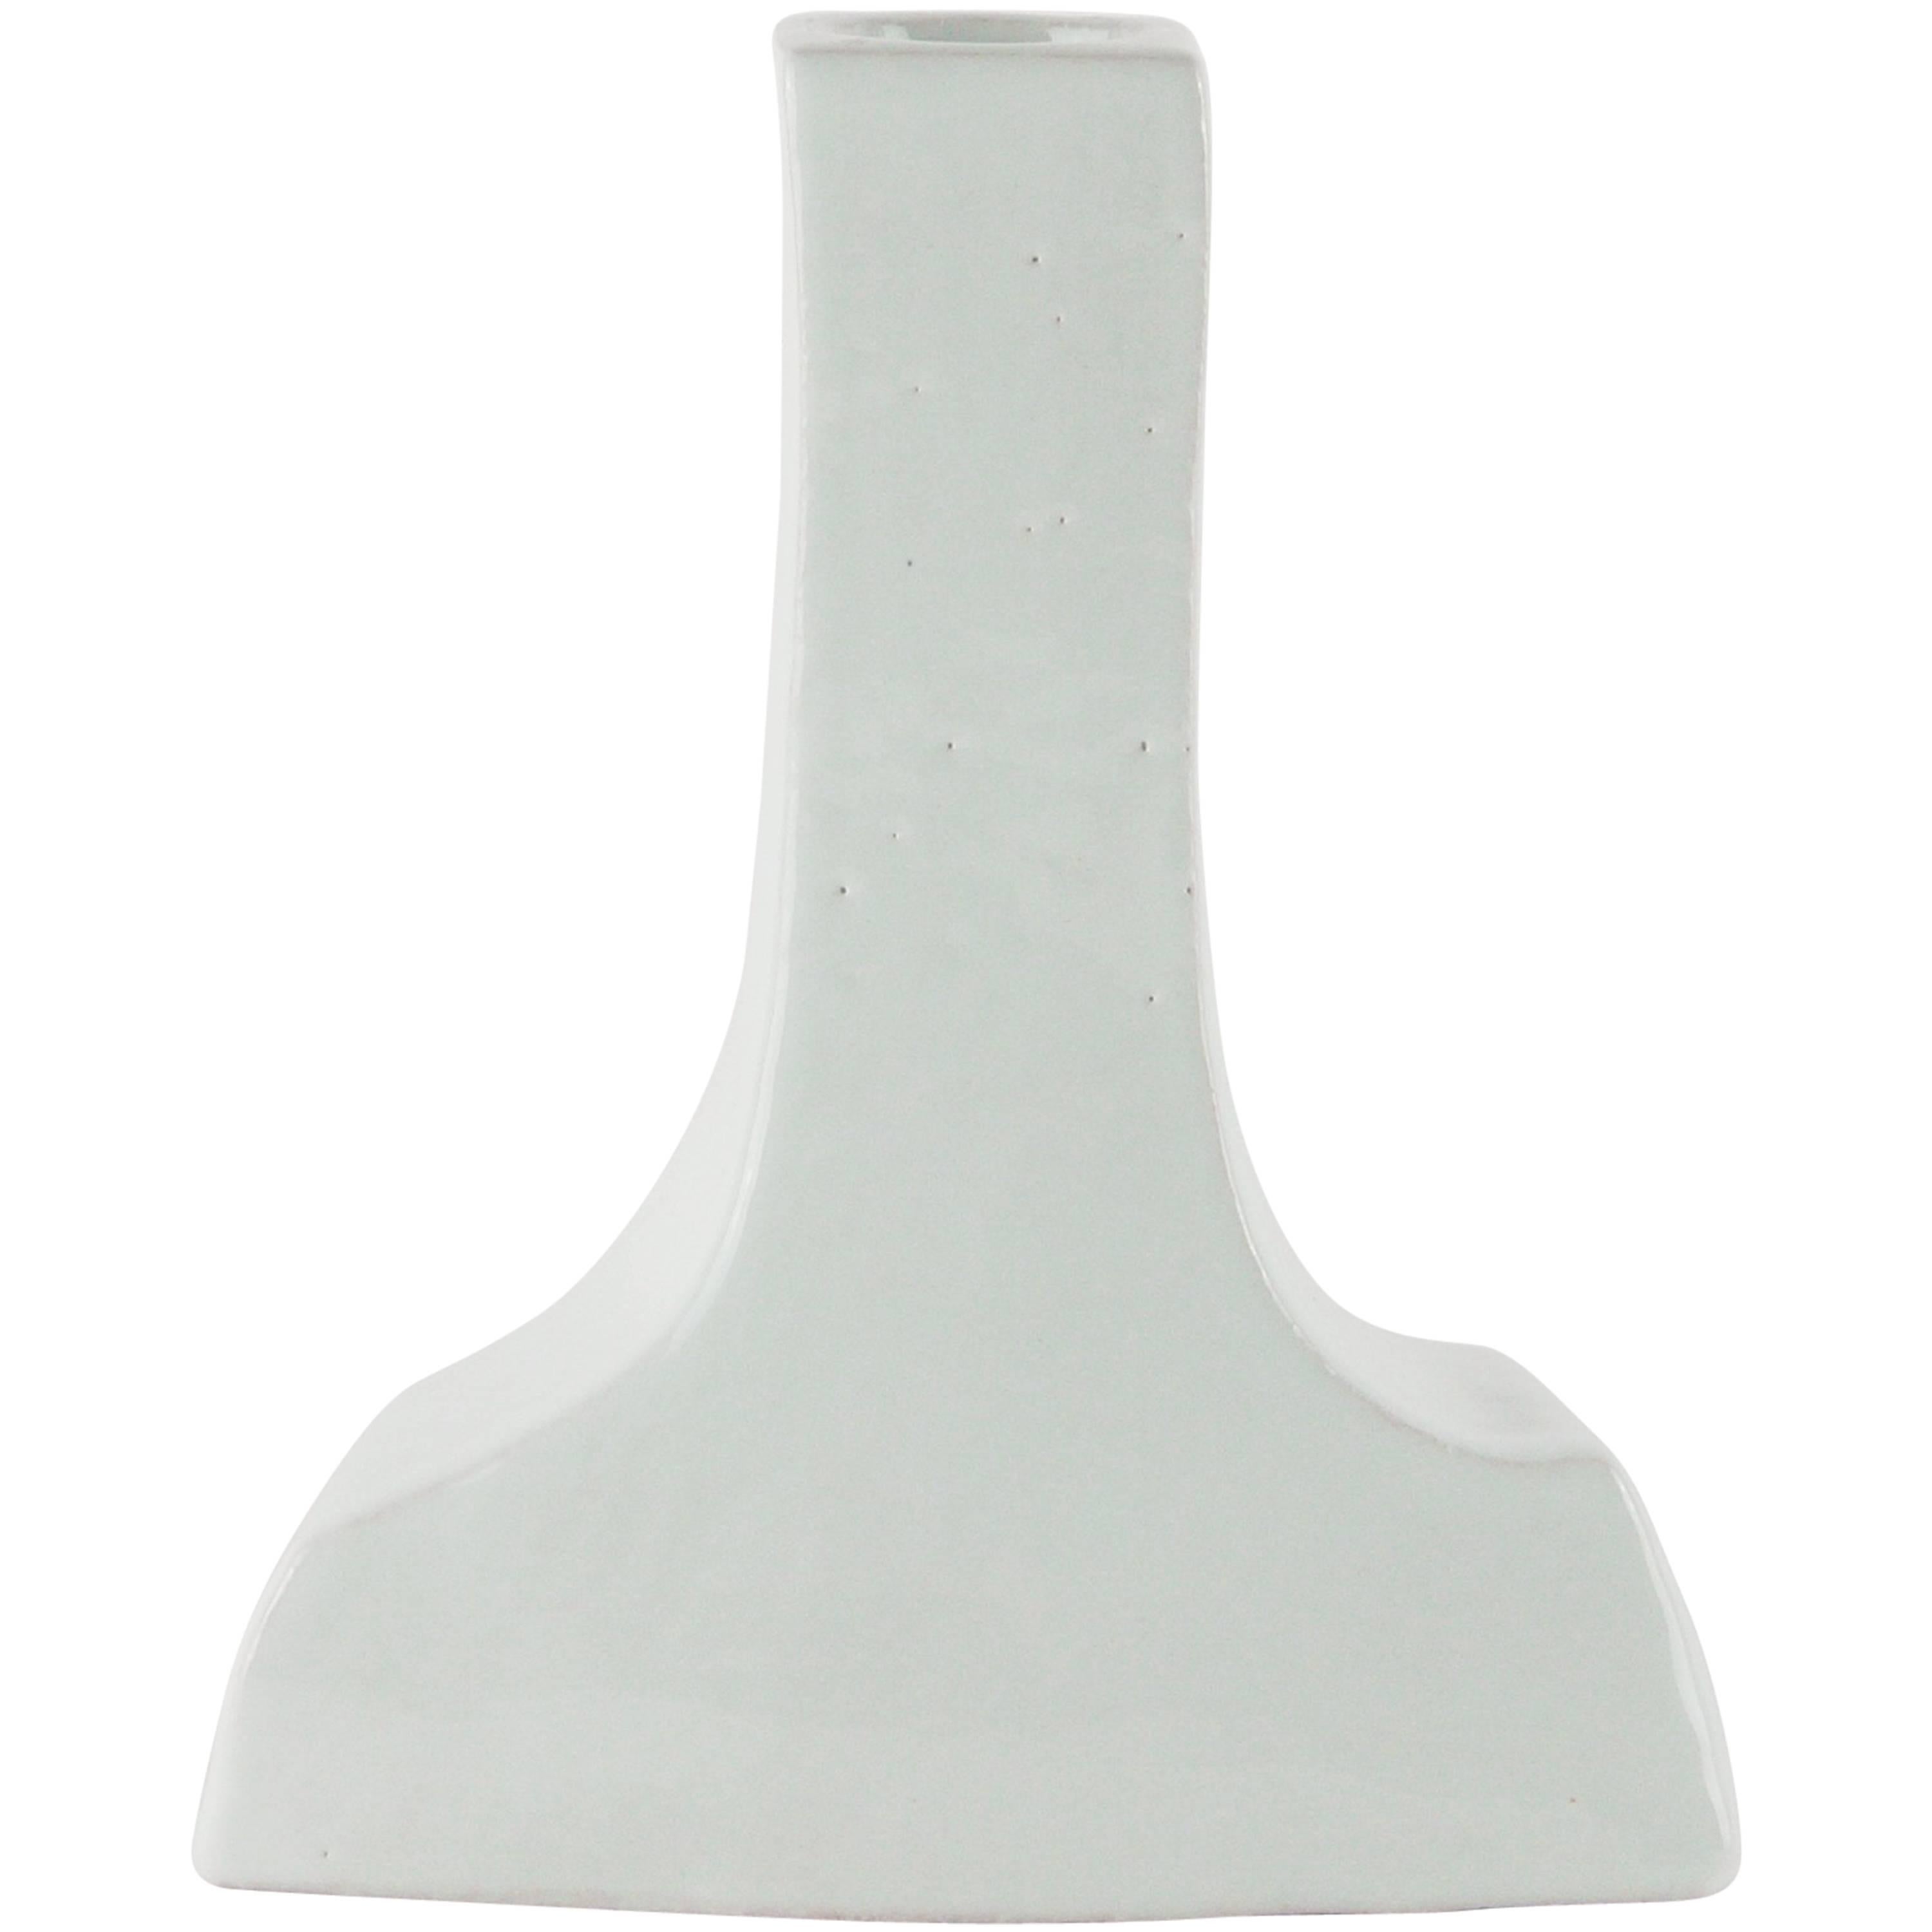 Contemporary Porcelain Candleholder with White Glossy Glaze